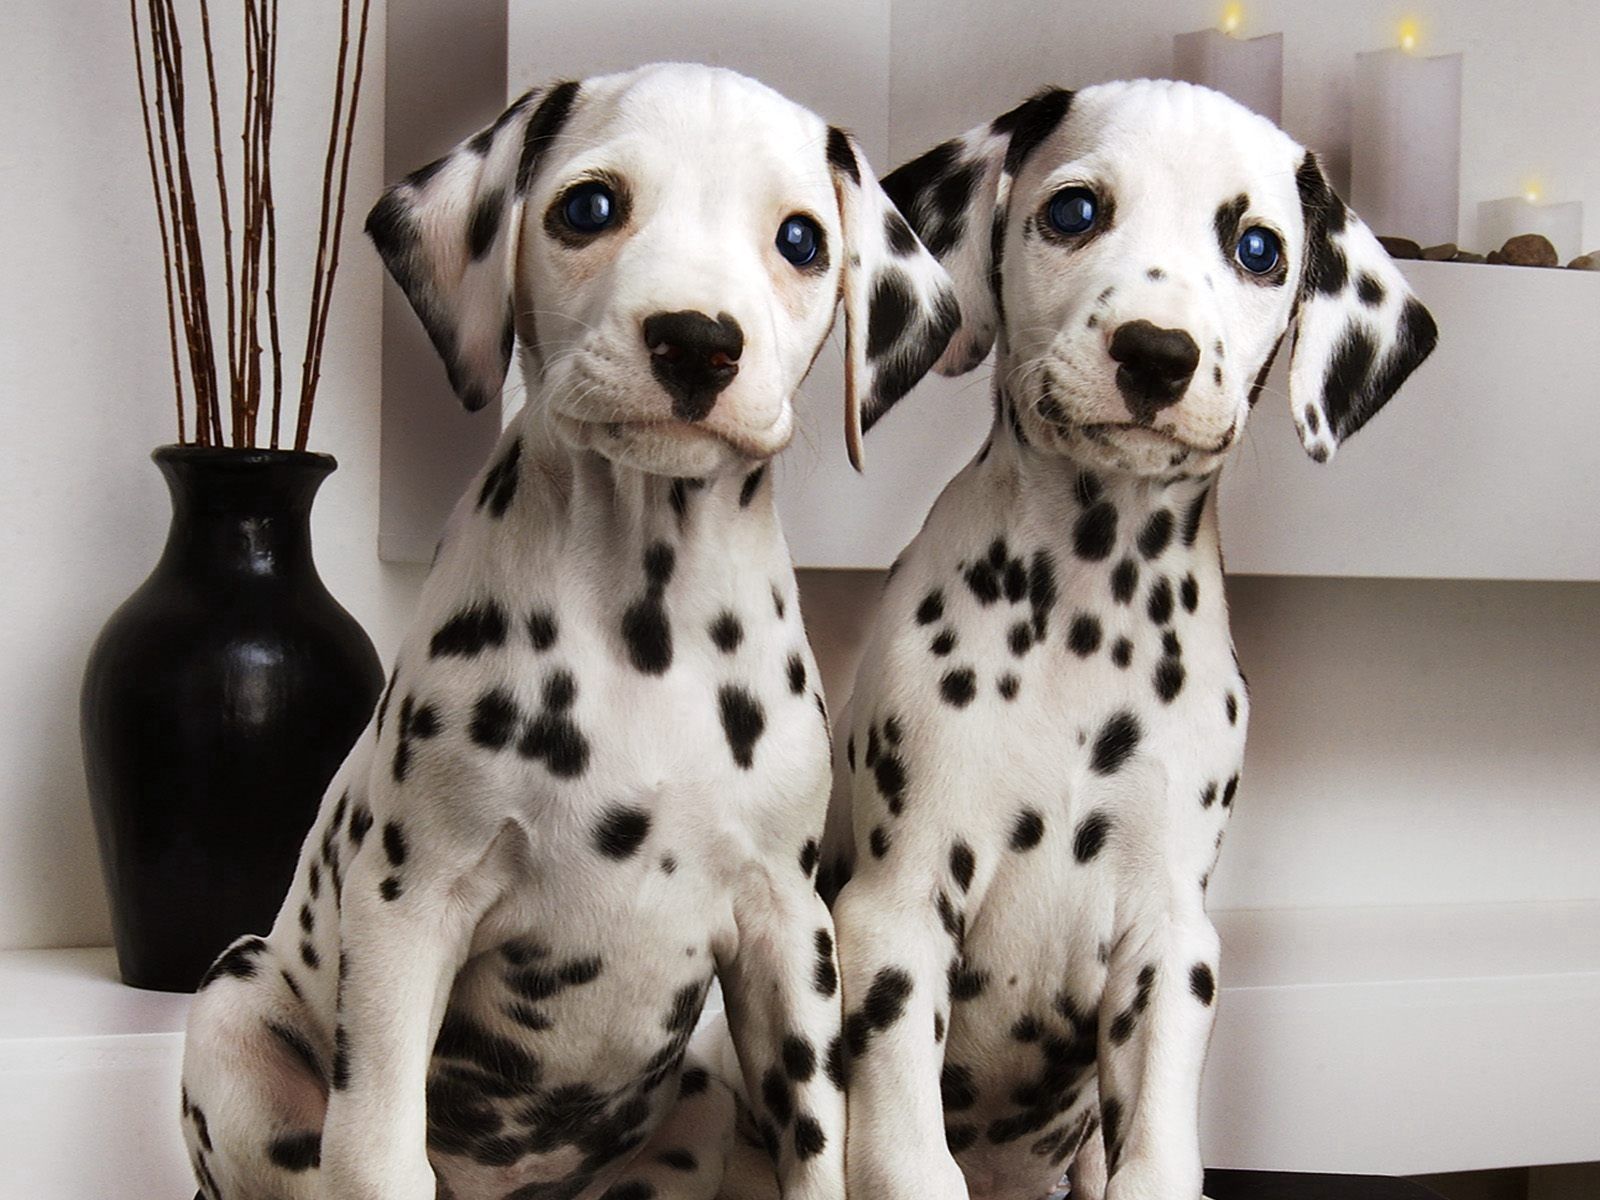 puppies, animals, couple, pair, spotted, spotty, dalmatians, dalmatines